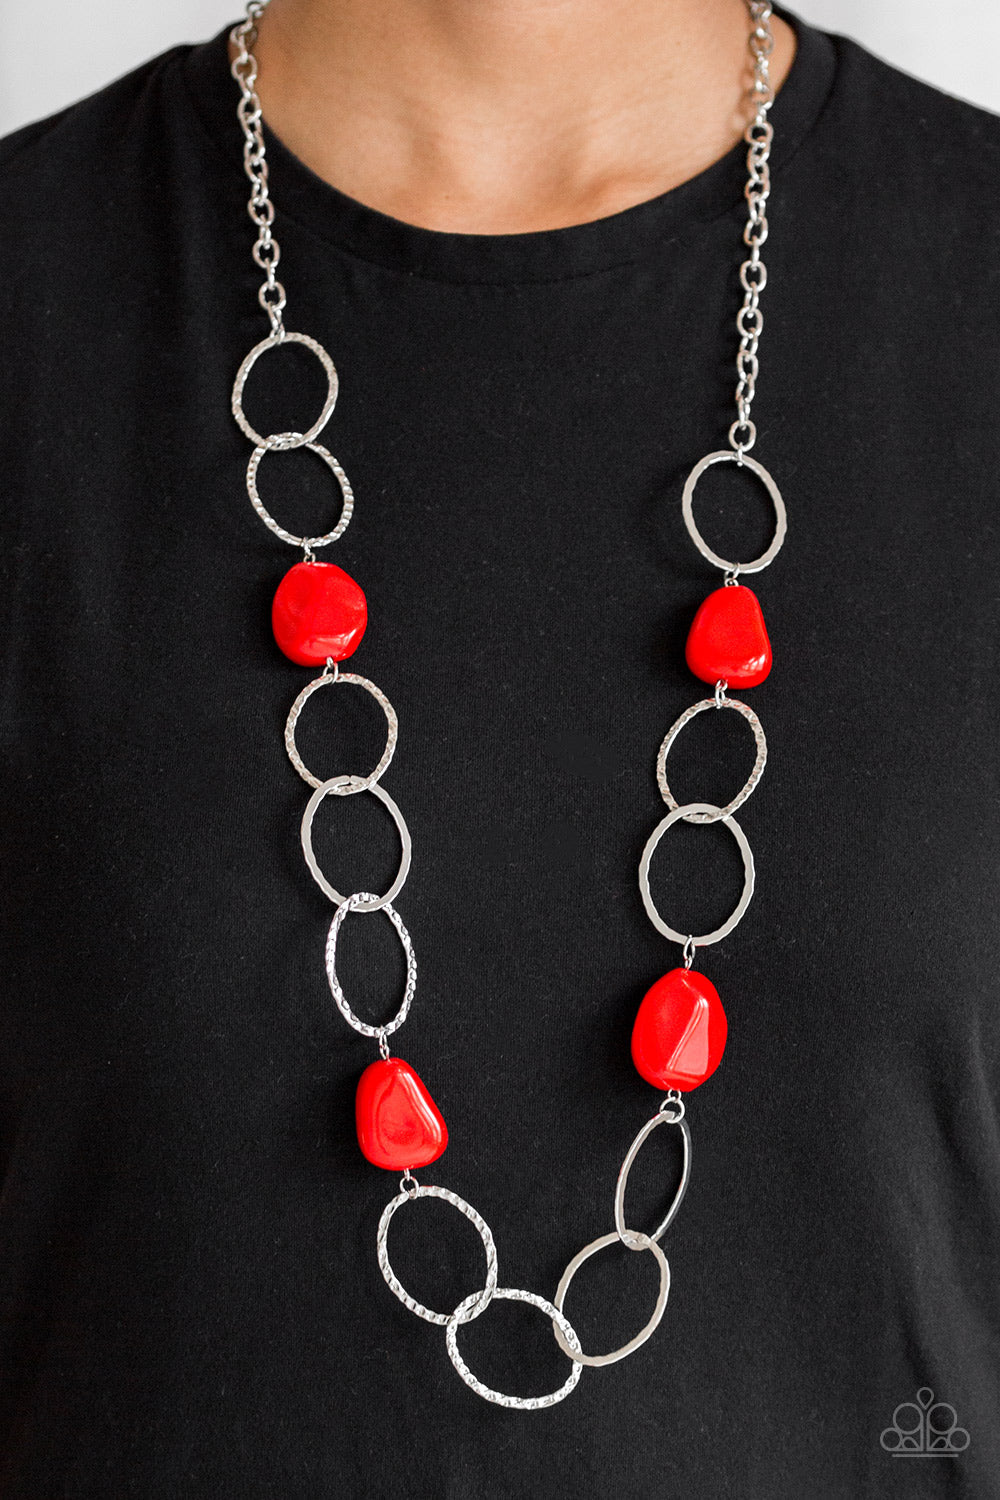 Paparazzi Modern Day Malibu - Red - Faceted Beads - Silver Hoops - Necklace & Earrings - $5 Jewelry with Ashley Swint